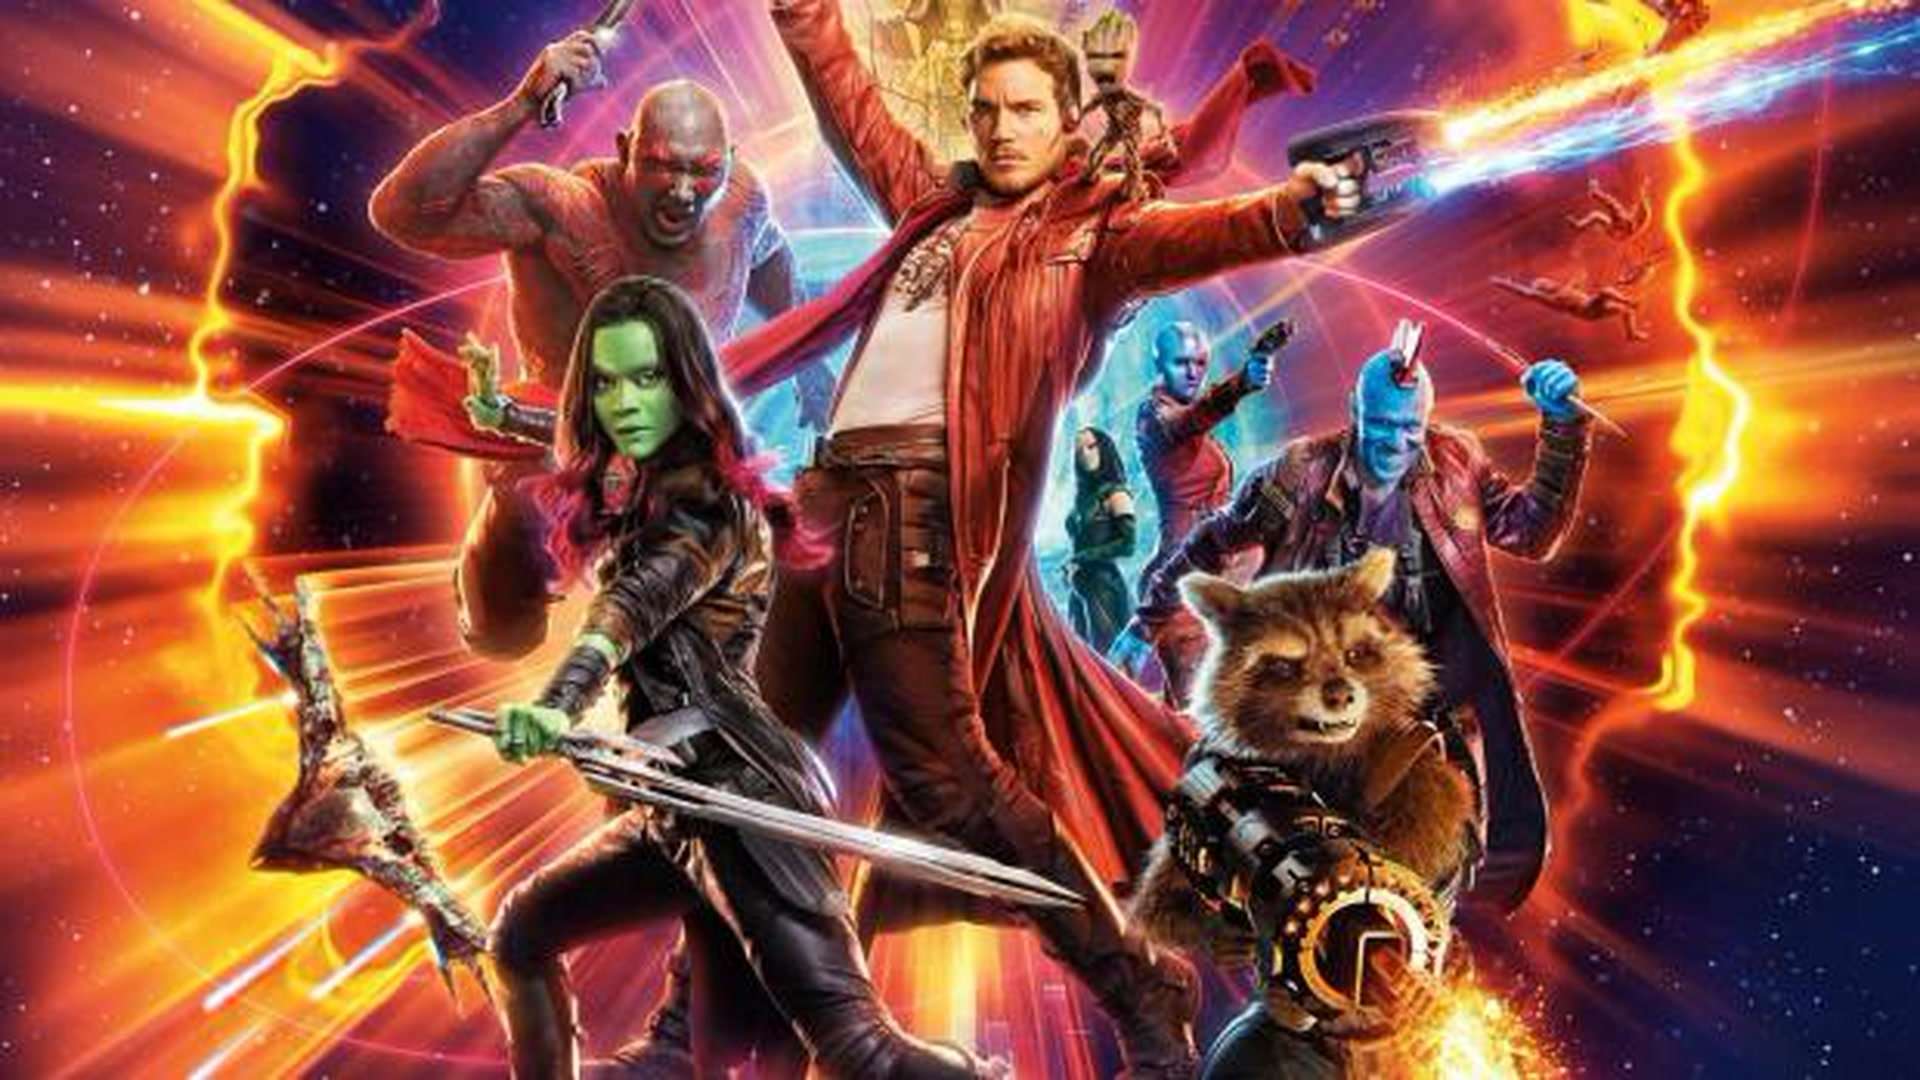 Guardians of The Galaxy